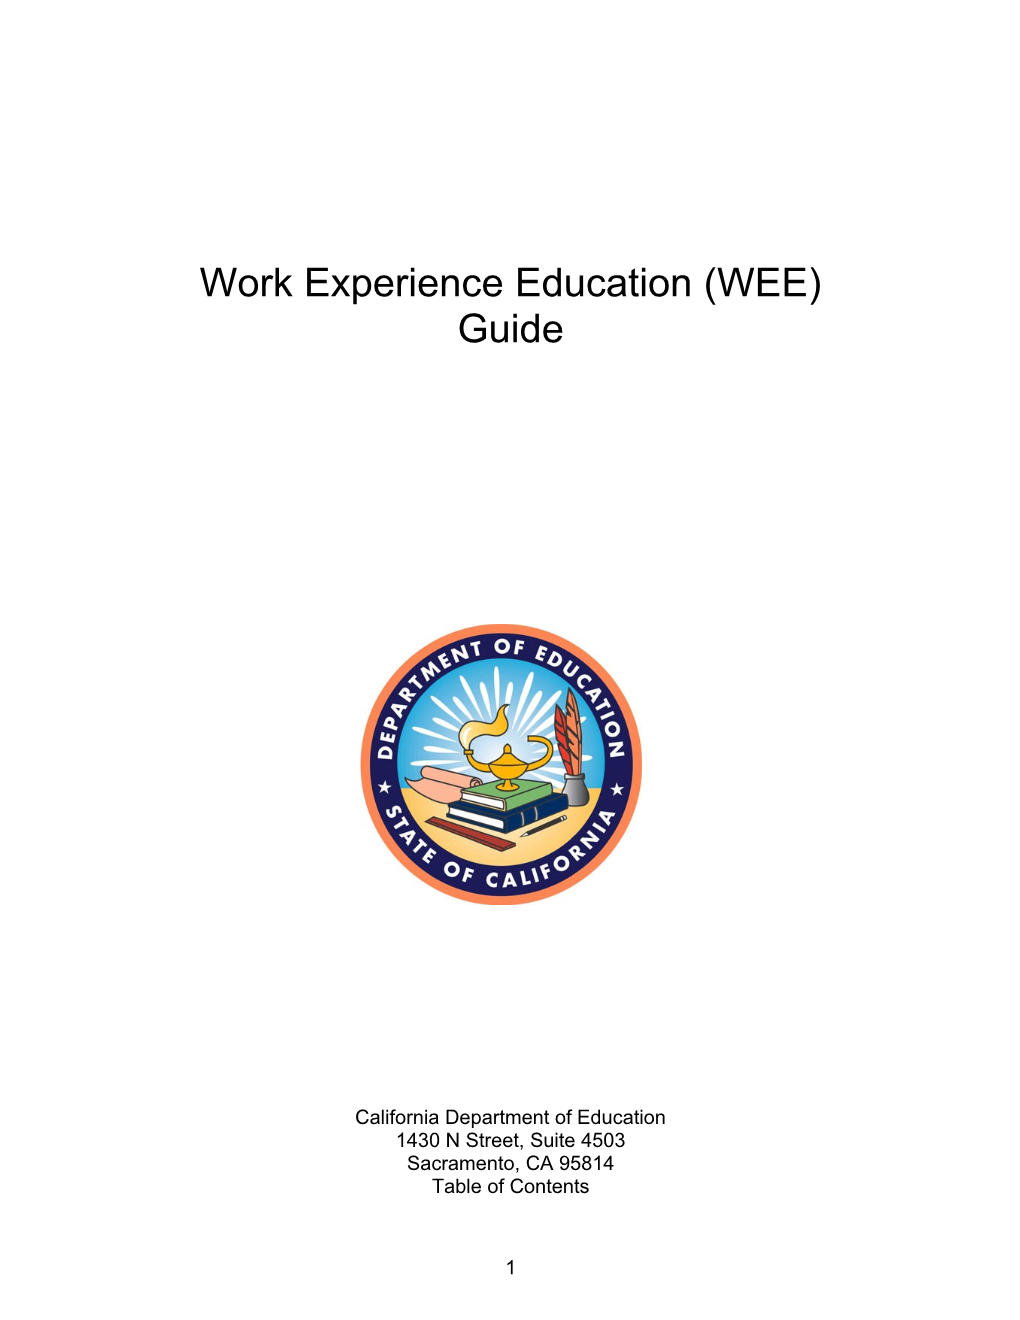 Work Experience Education Guide - Work Experience Education (CA Dept of Education)